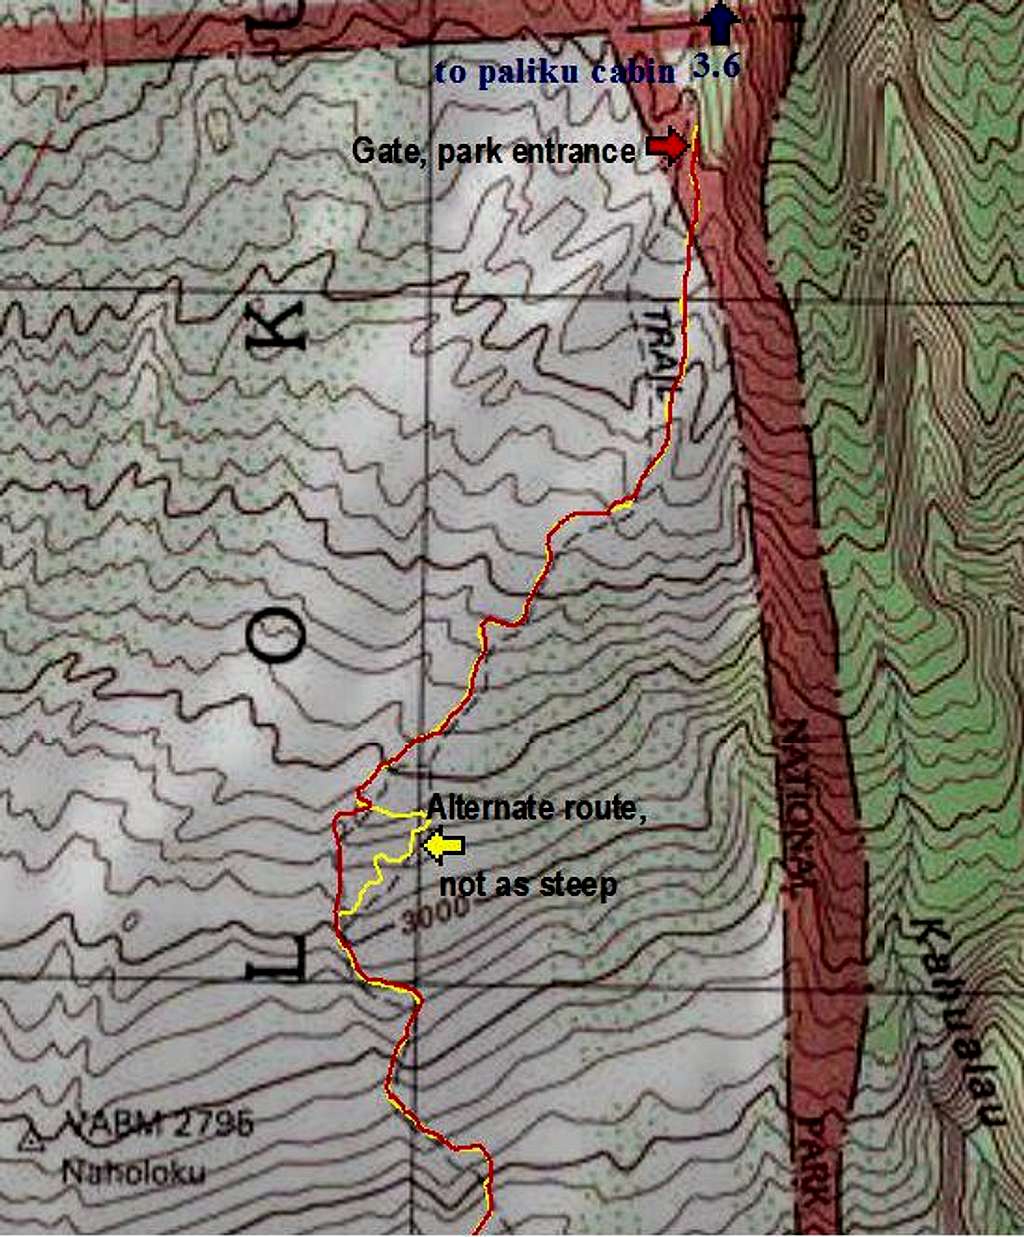 Upper section of the Kaupo route